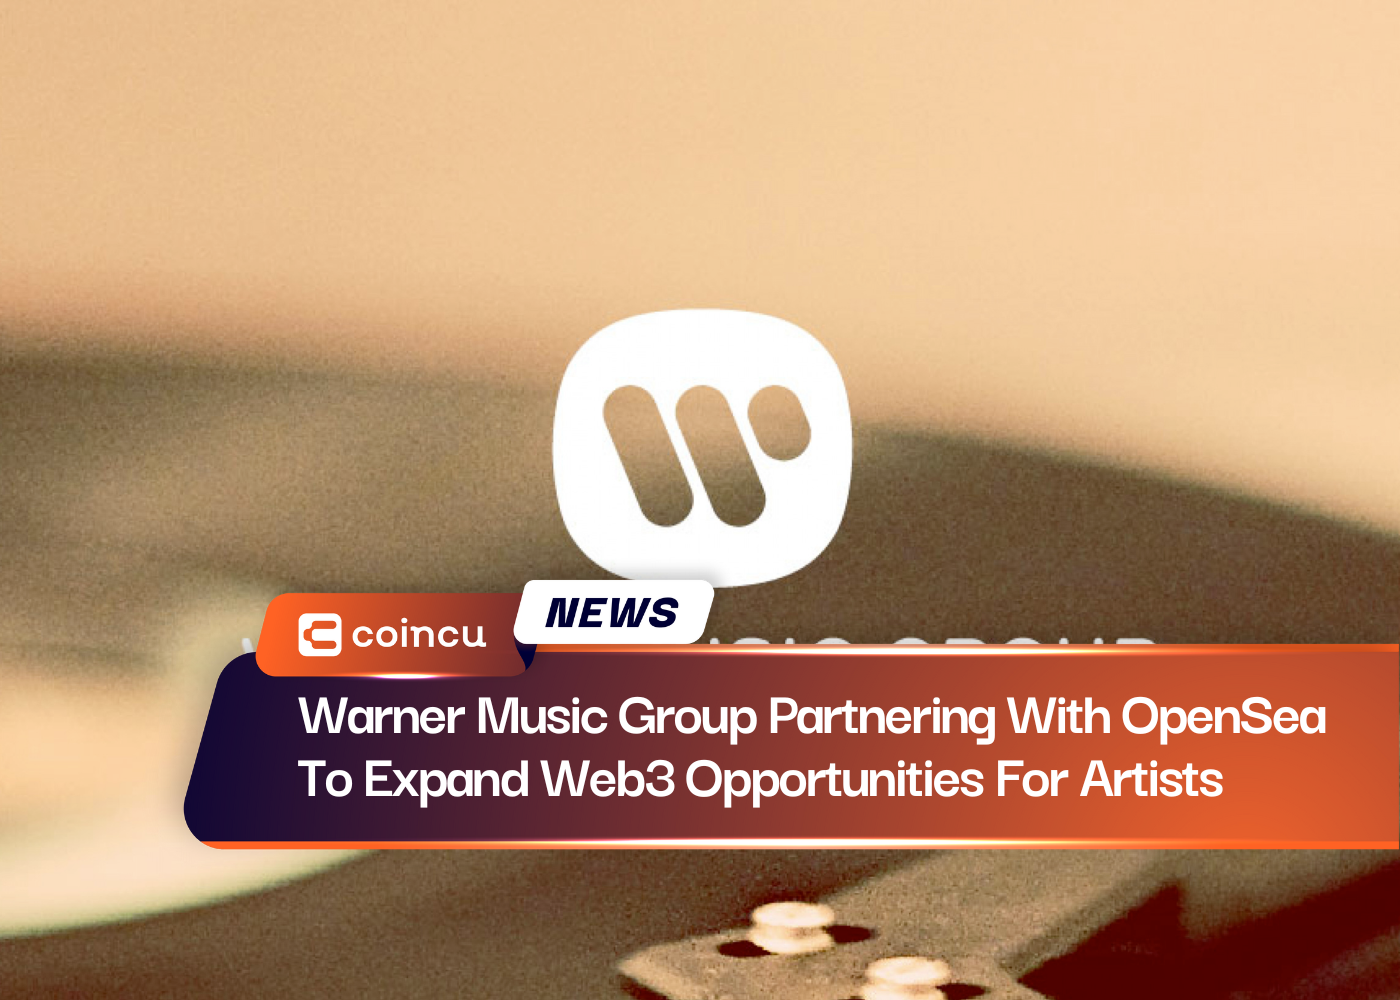 Warner Music Group Partners With OpenSea To Expand Web3 Opportunities For Artists